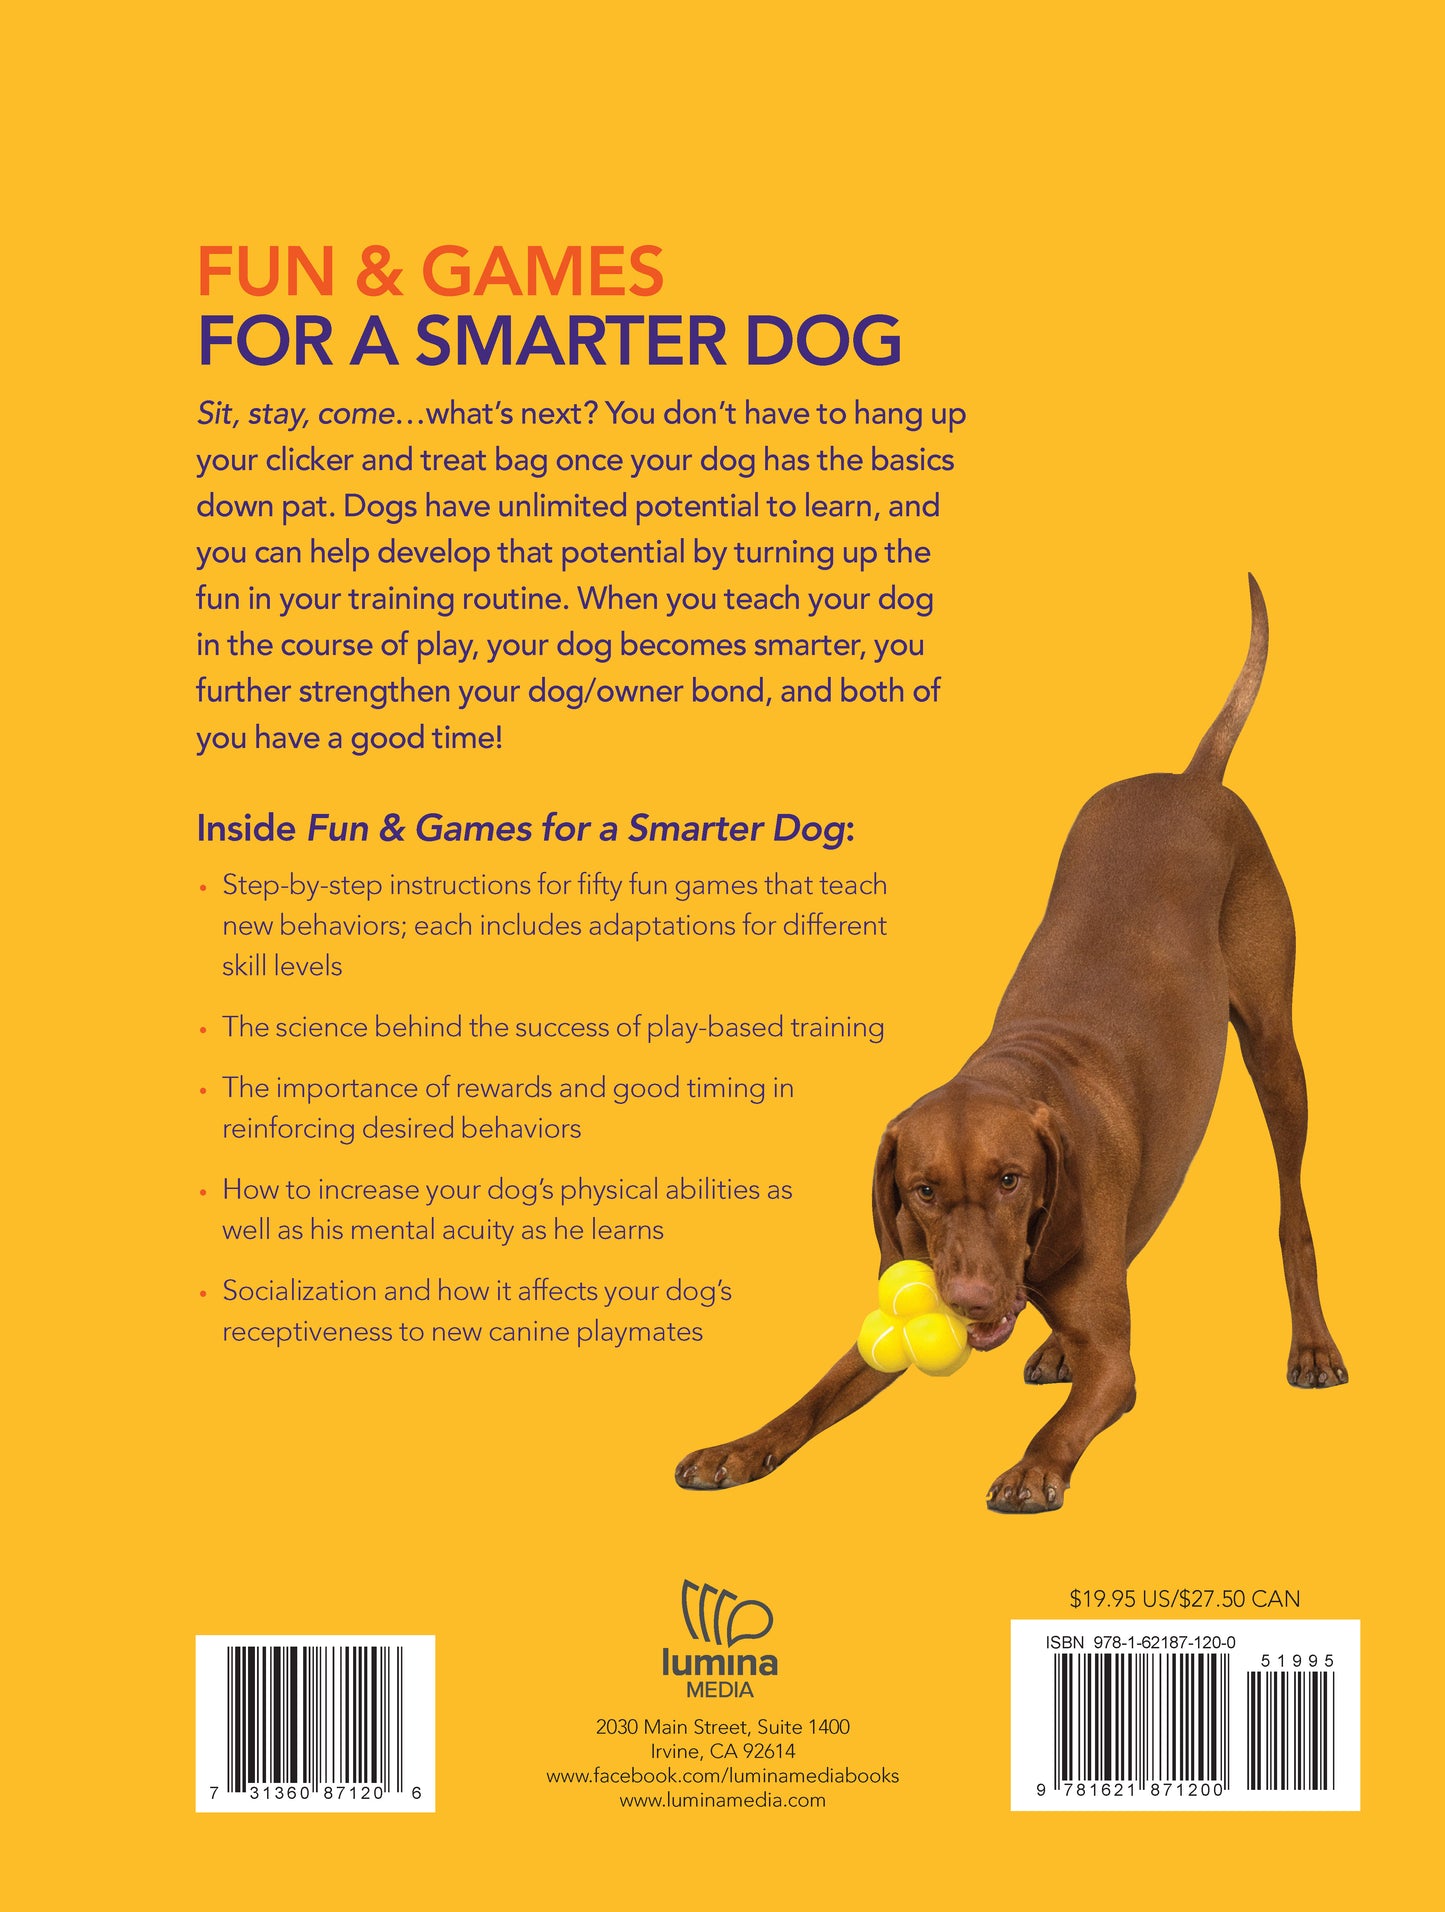 Fun & Games for a Smarter Dog